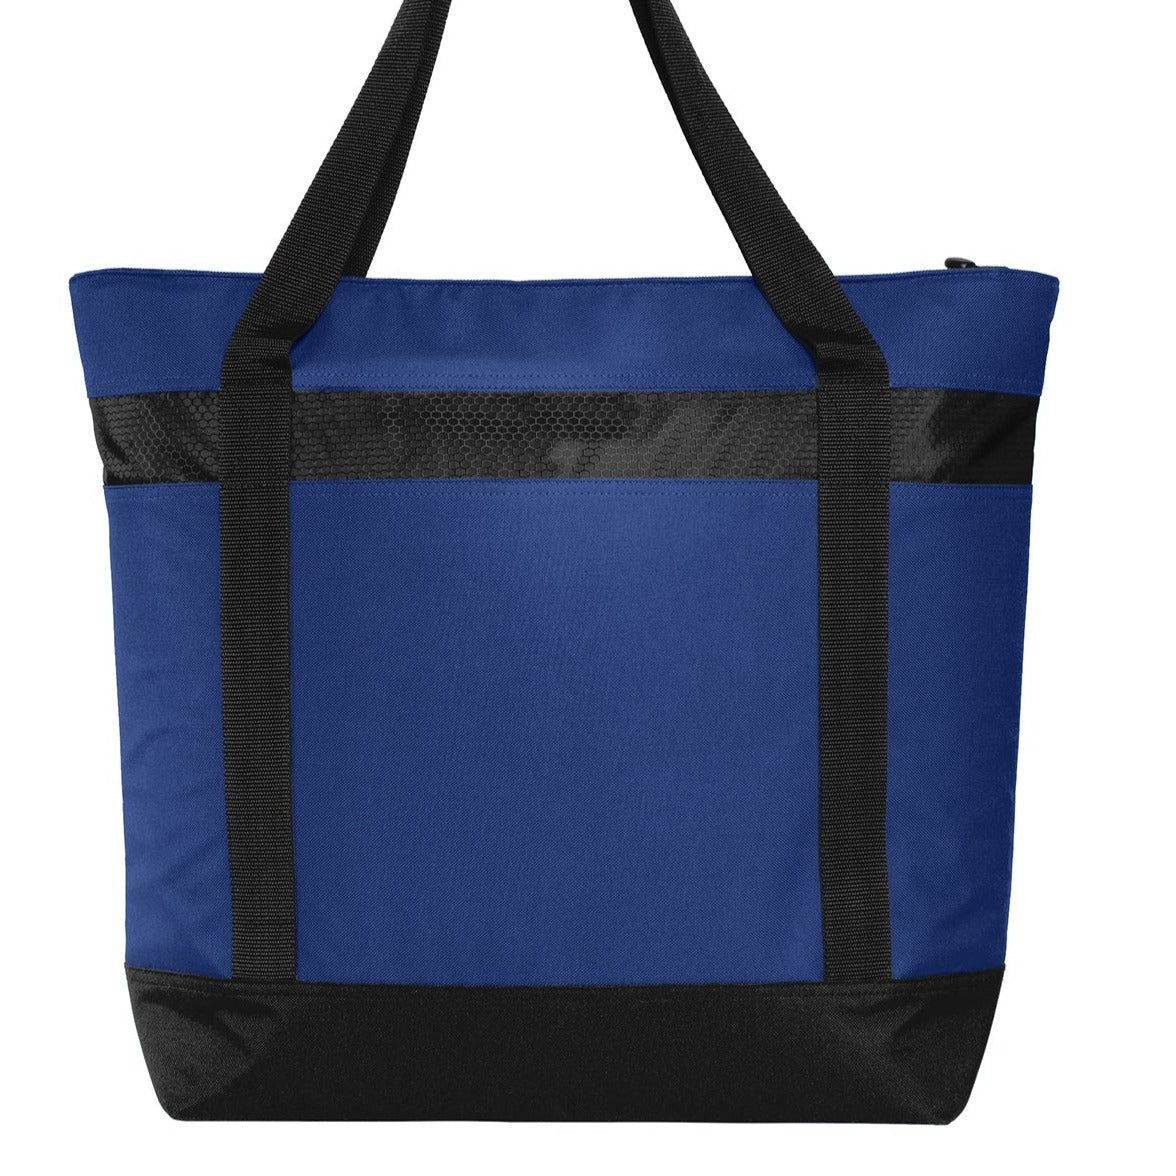 Port Authority® Large Tote CoolerPort Authority® Large Tote Cooler BG527